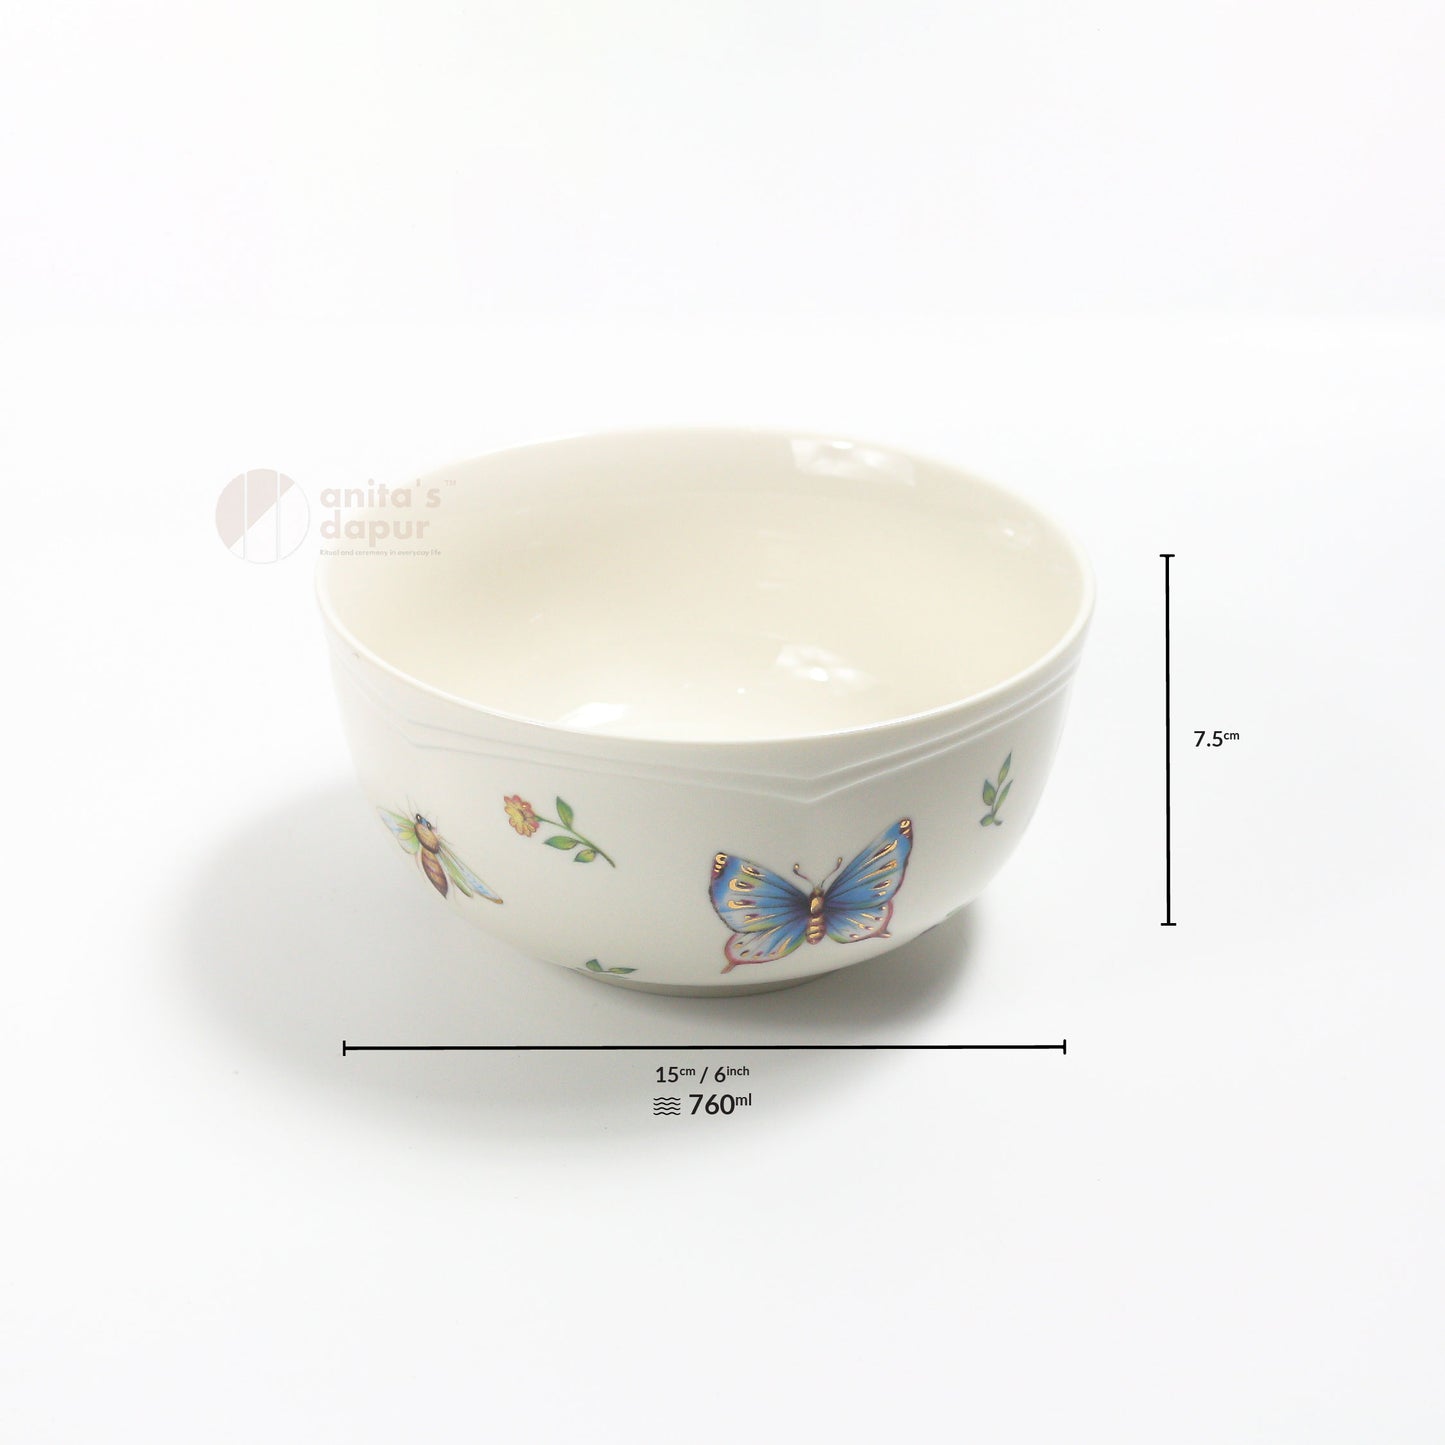 Vintage Insect Design Bowl (6 inch)